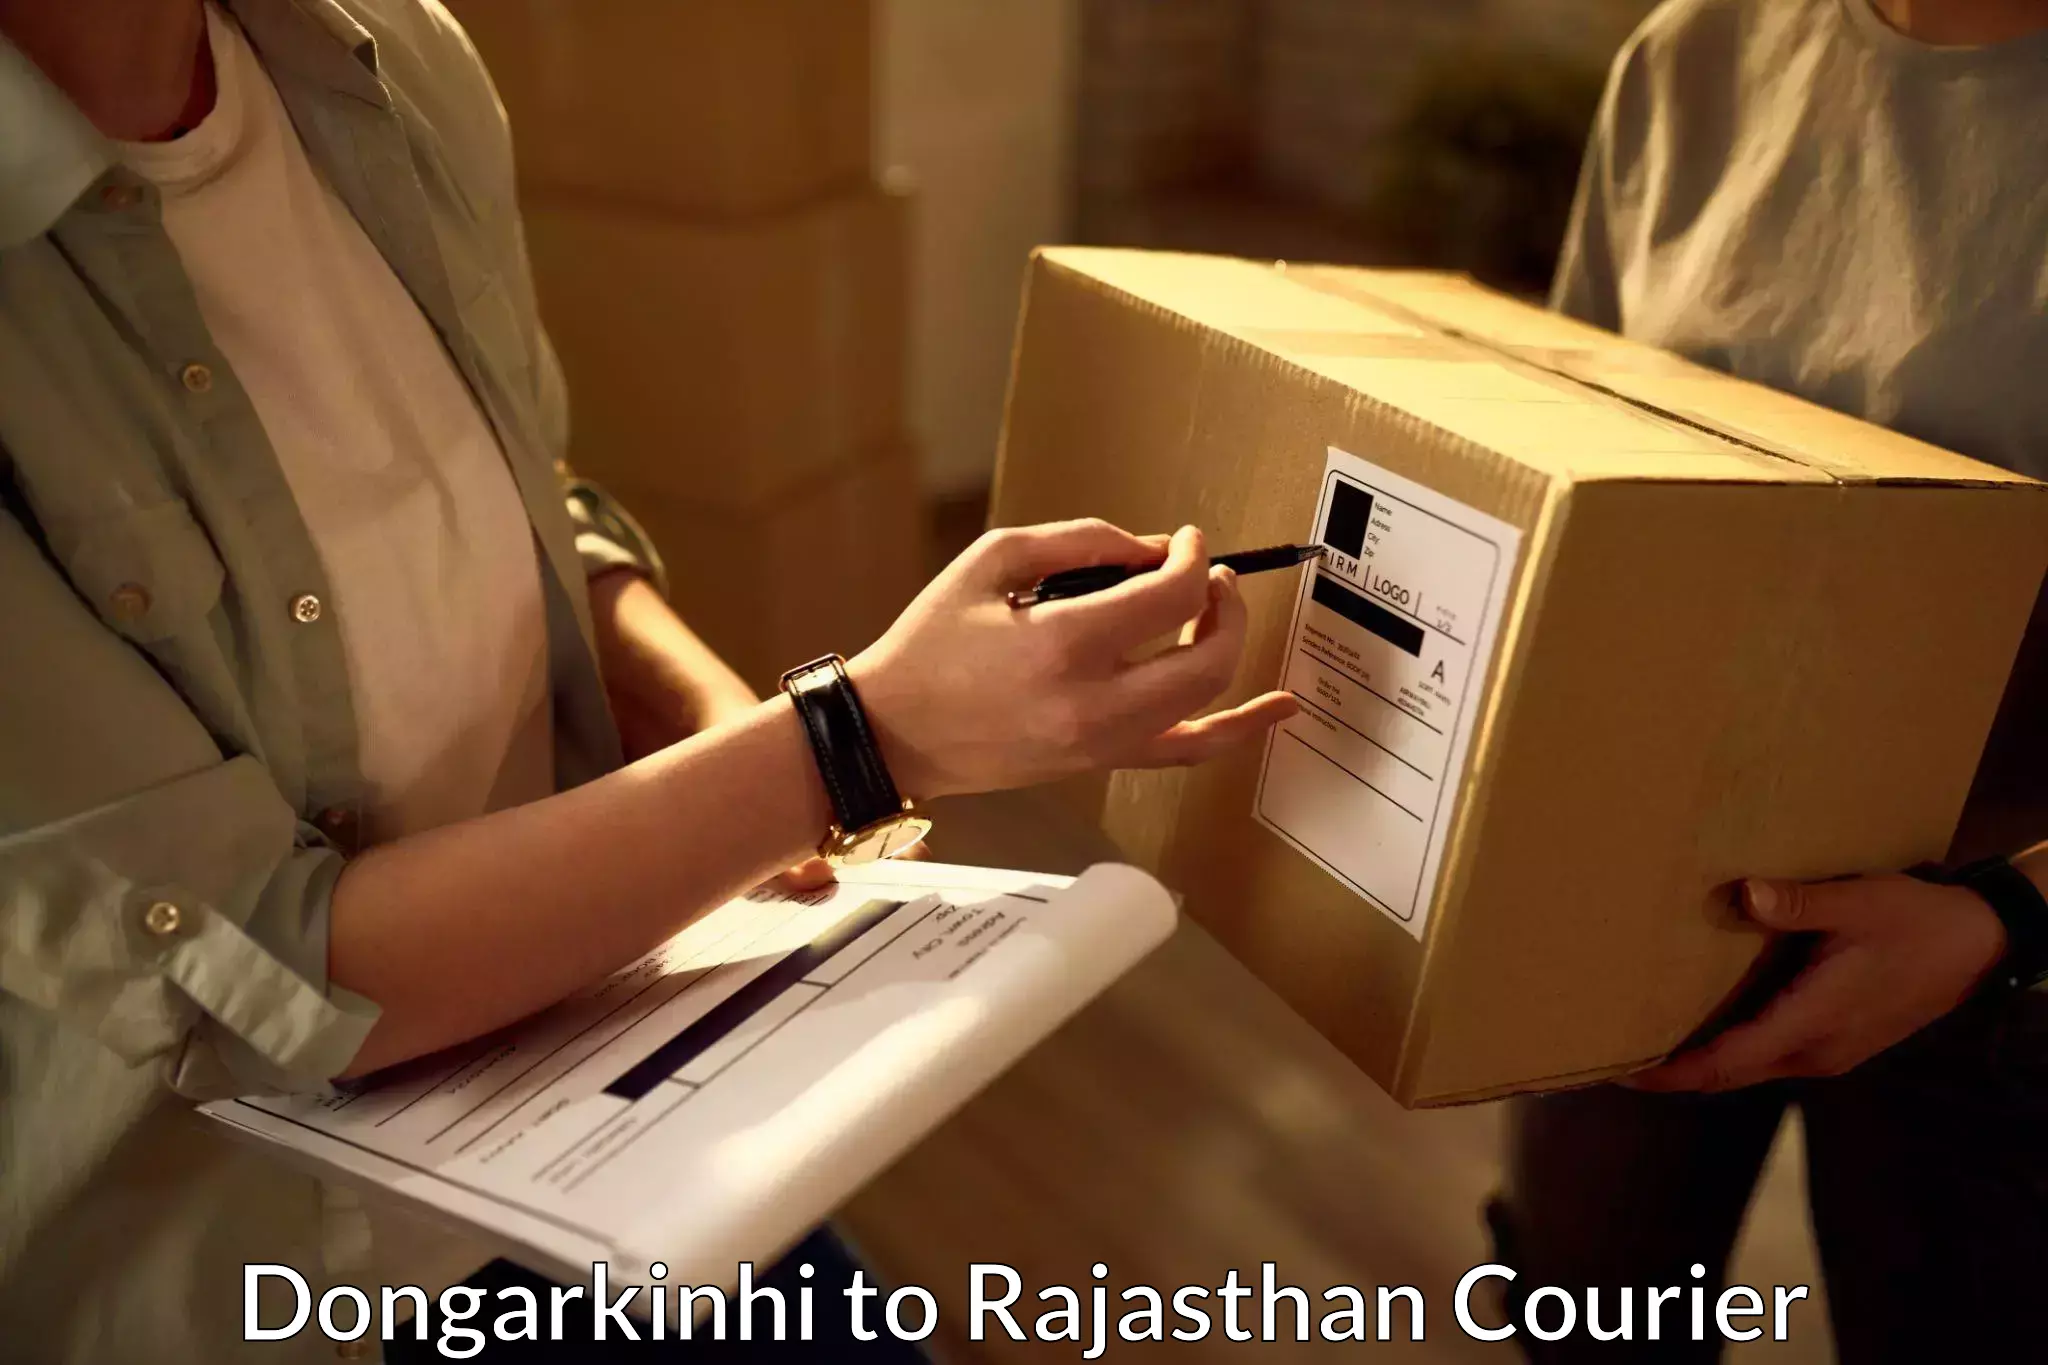 Local delivery service Dongarkinhi to Rajasthan